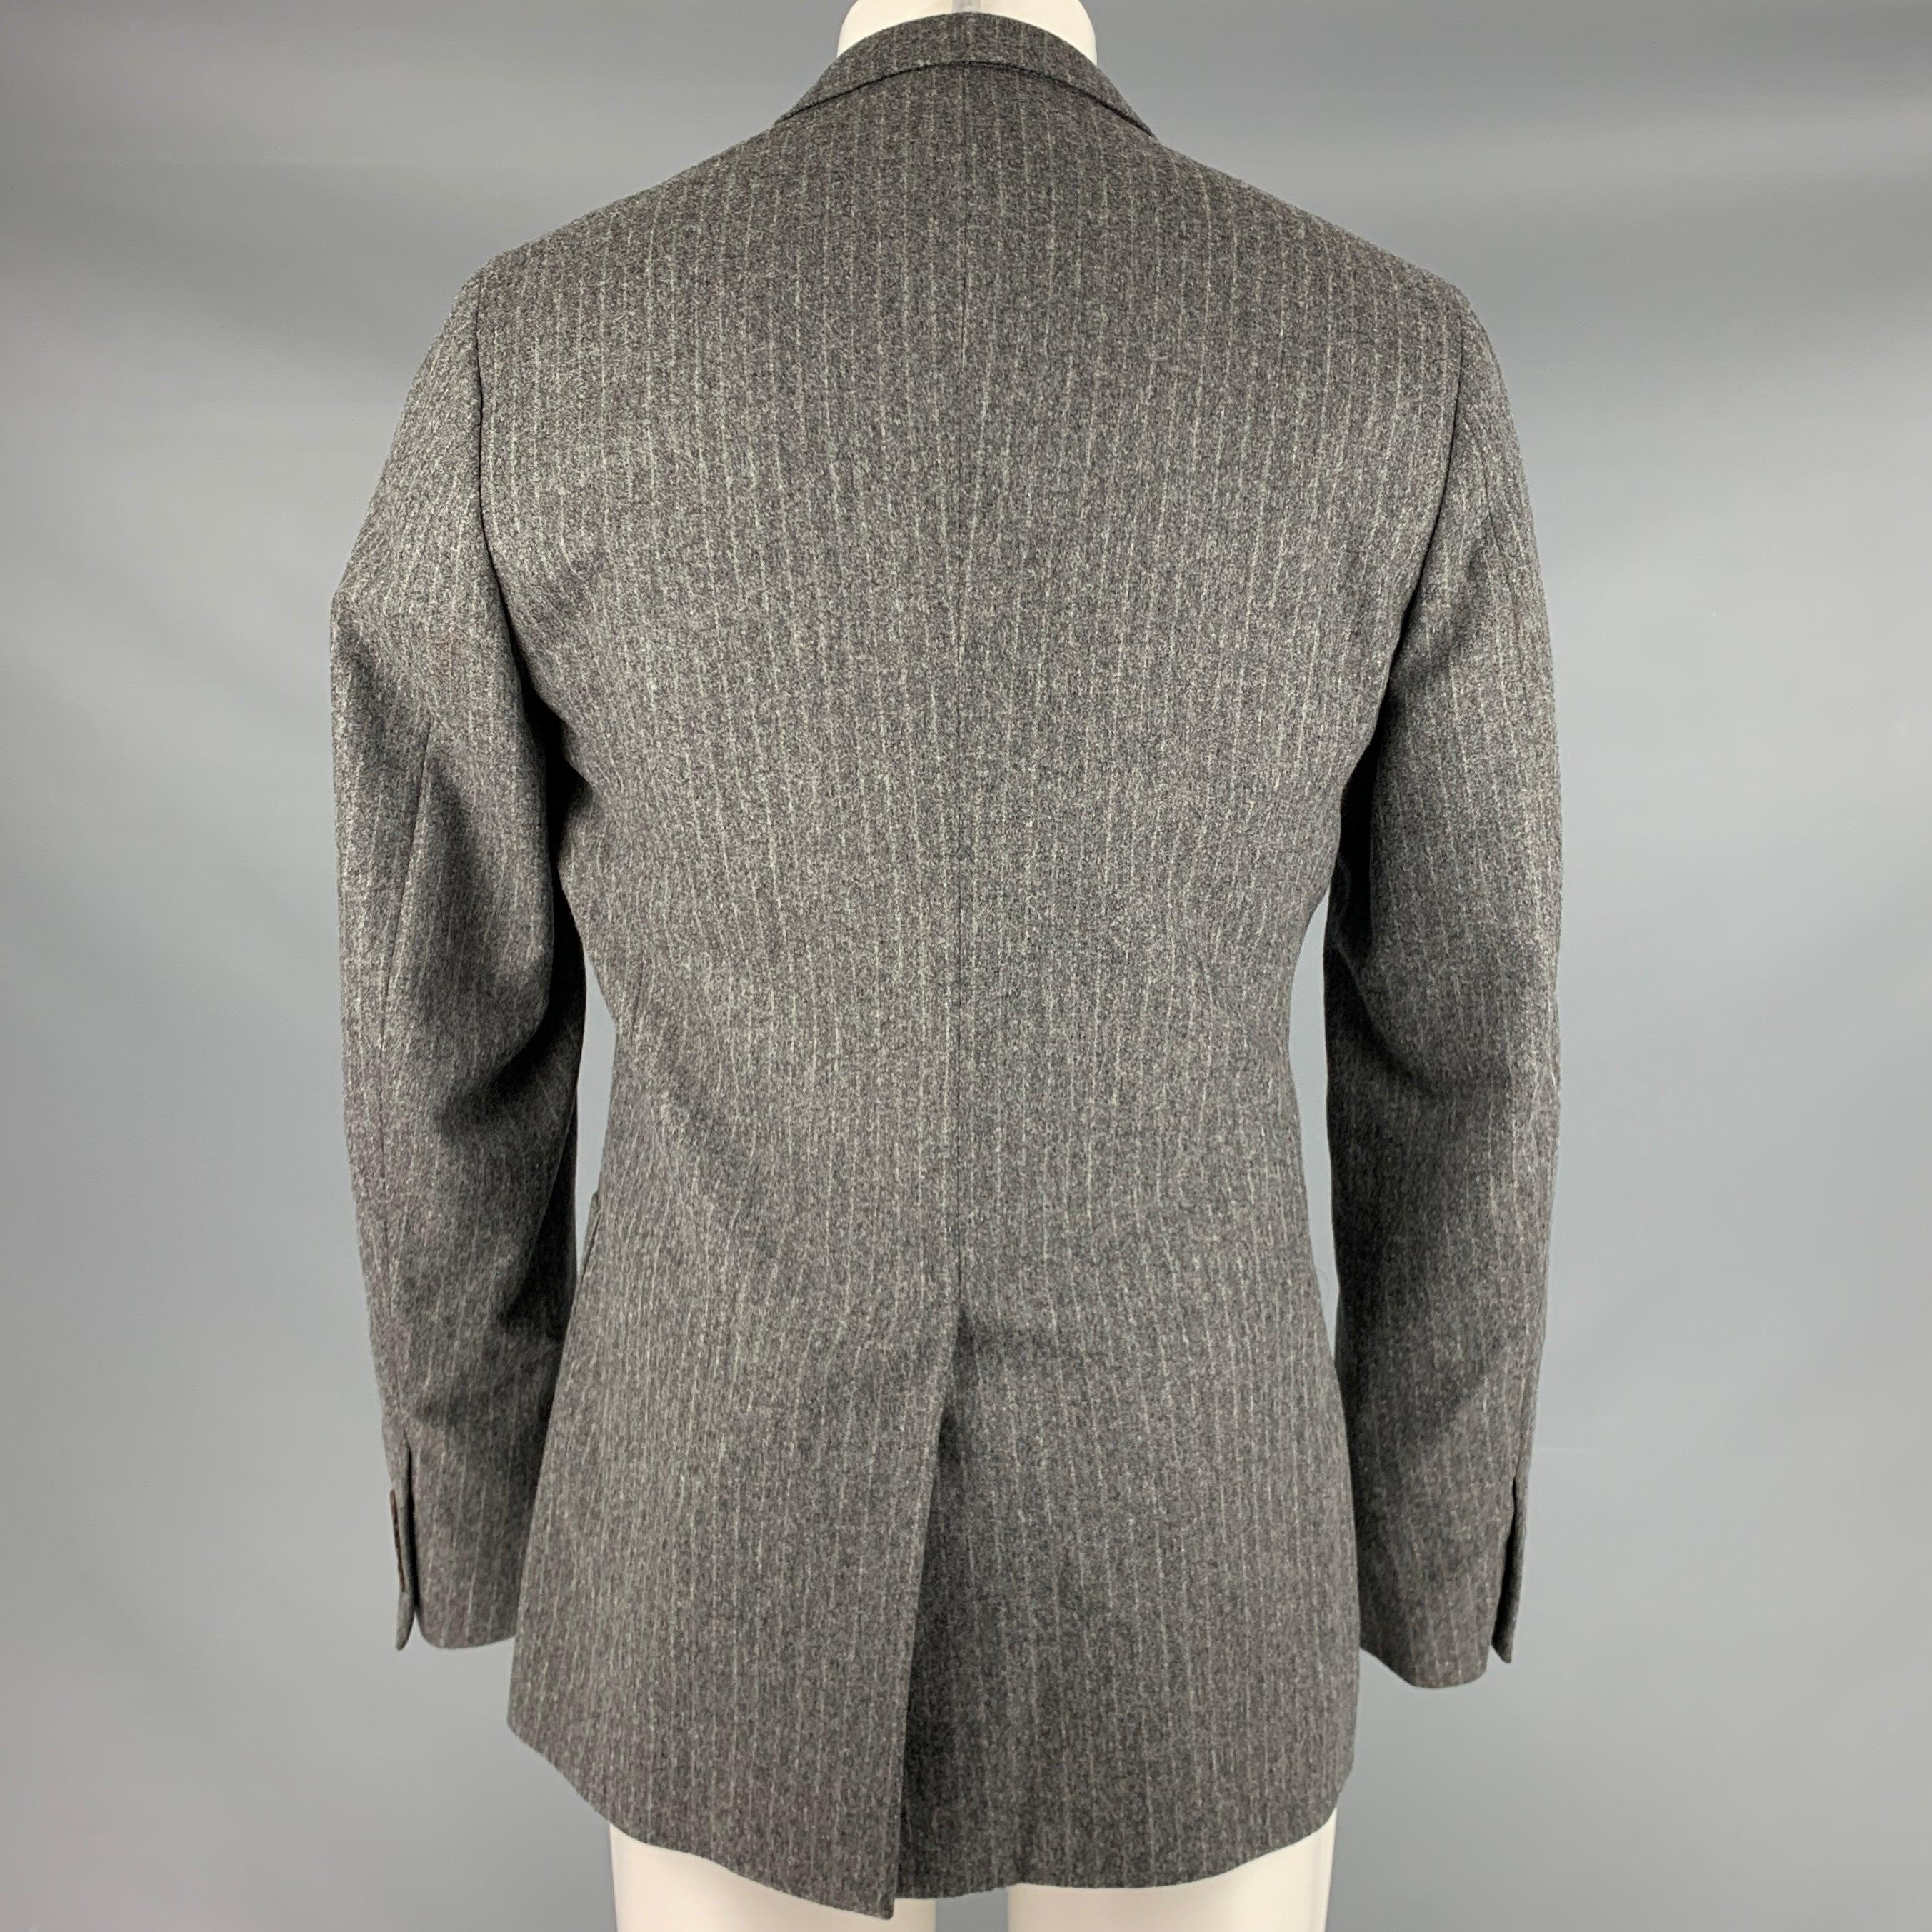 DOLCE & GABBANA Size 40 Grey Stripe Wool Blend Sport Coat In Good Condition For Sale In San Francisco, CA